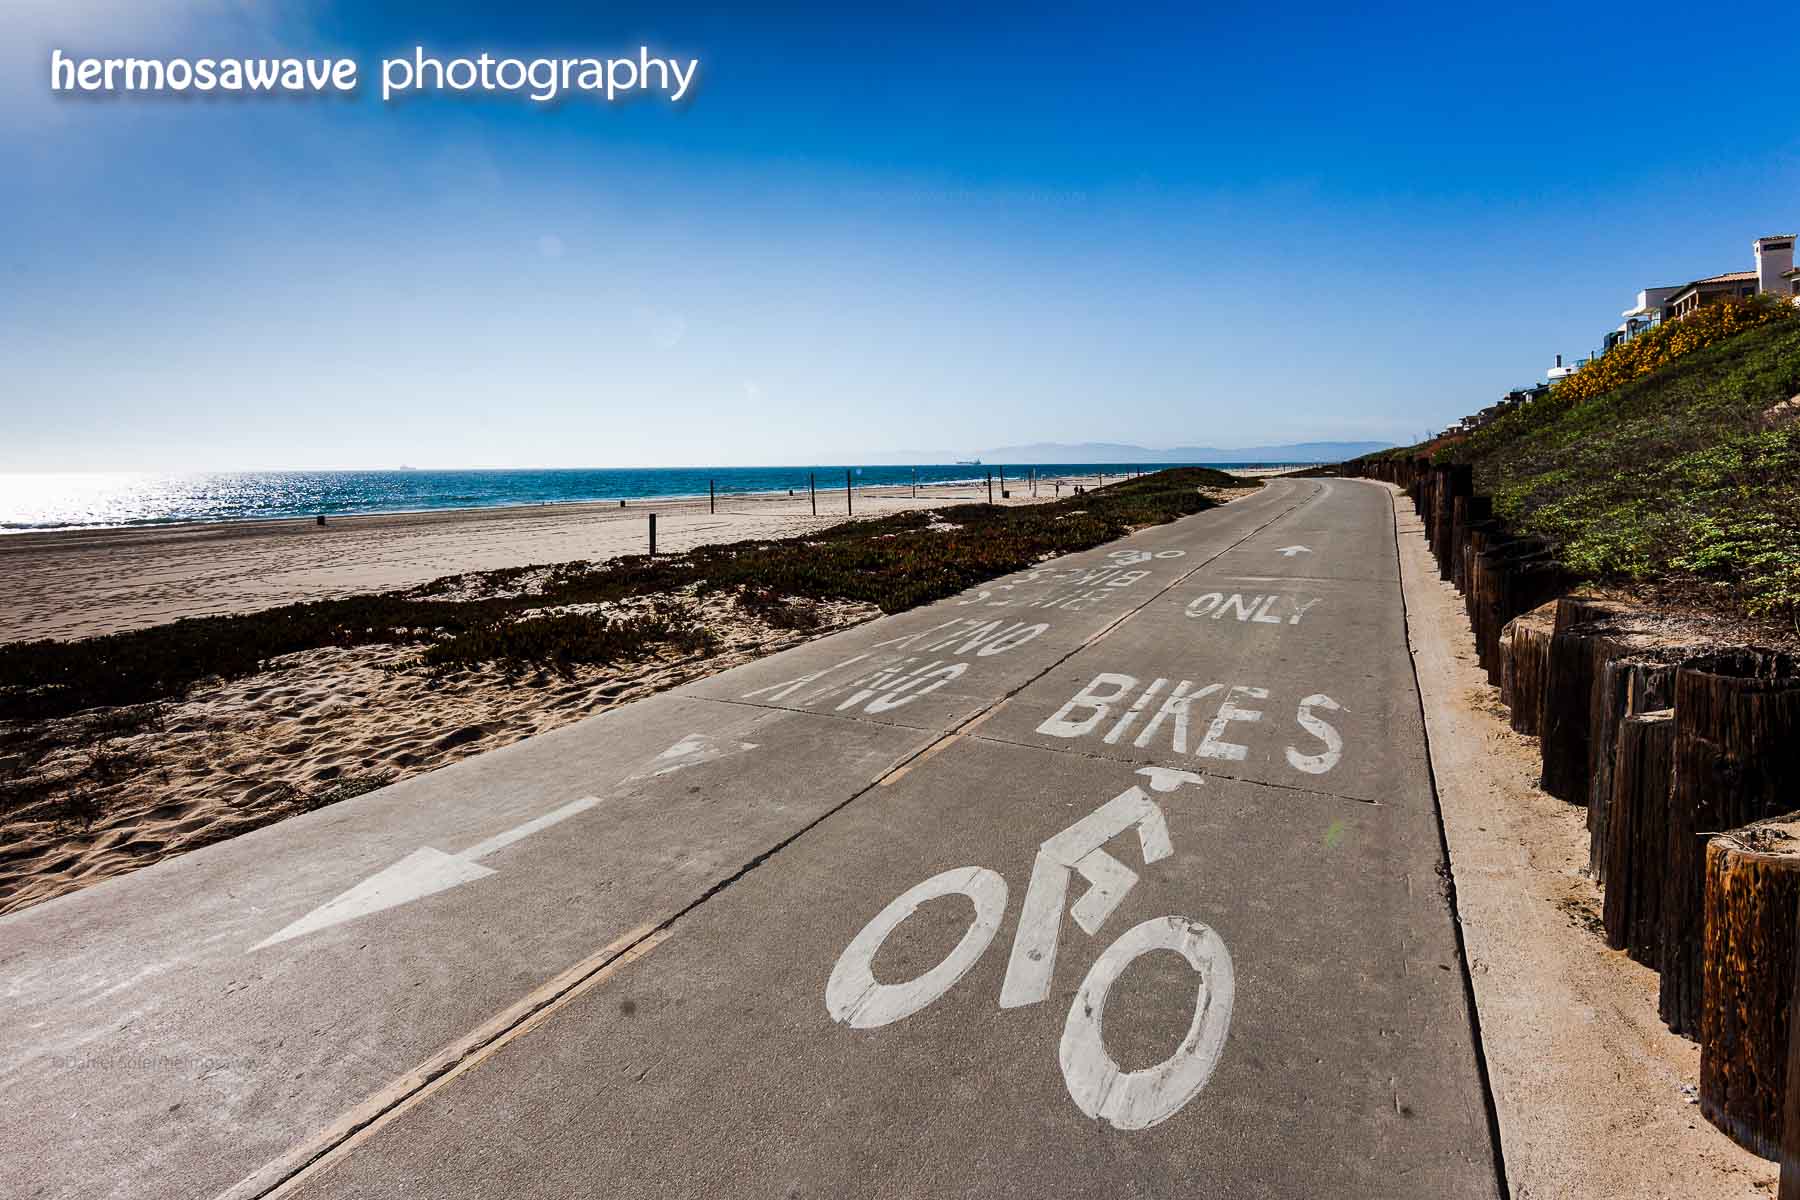 Bikes Only